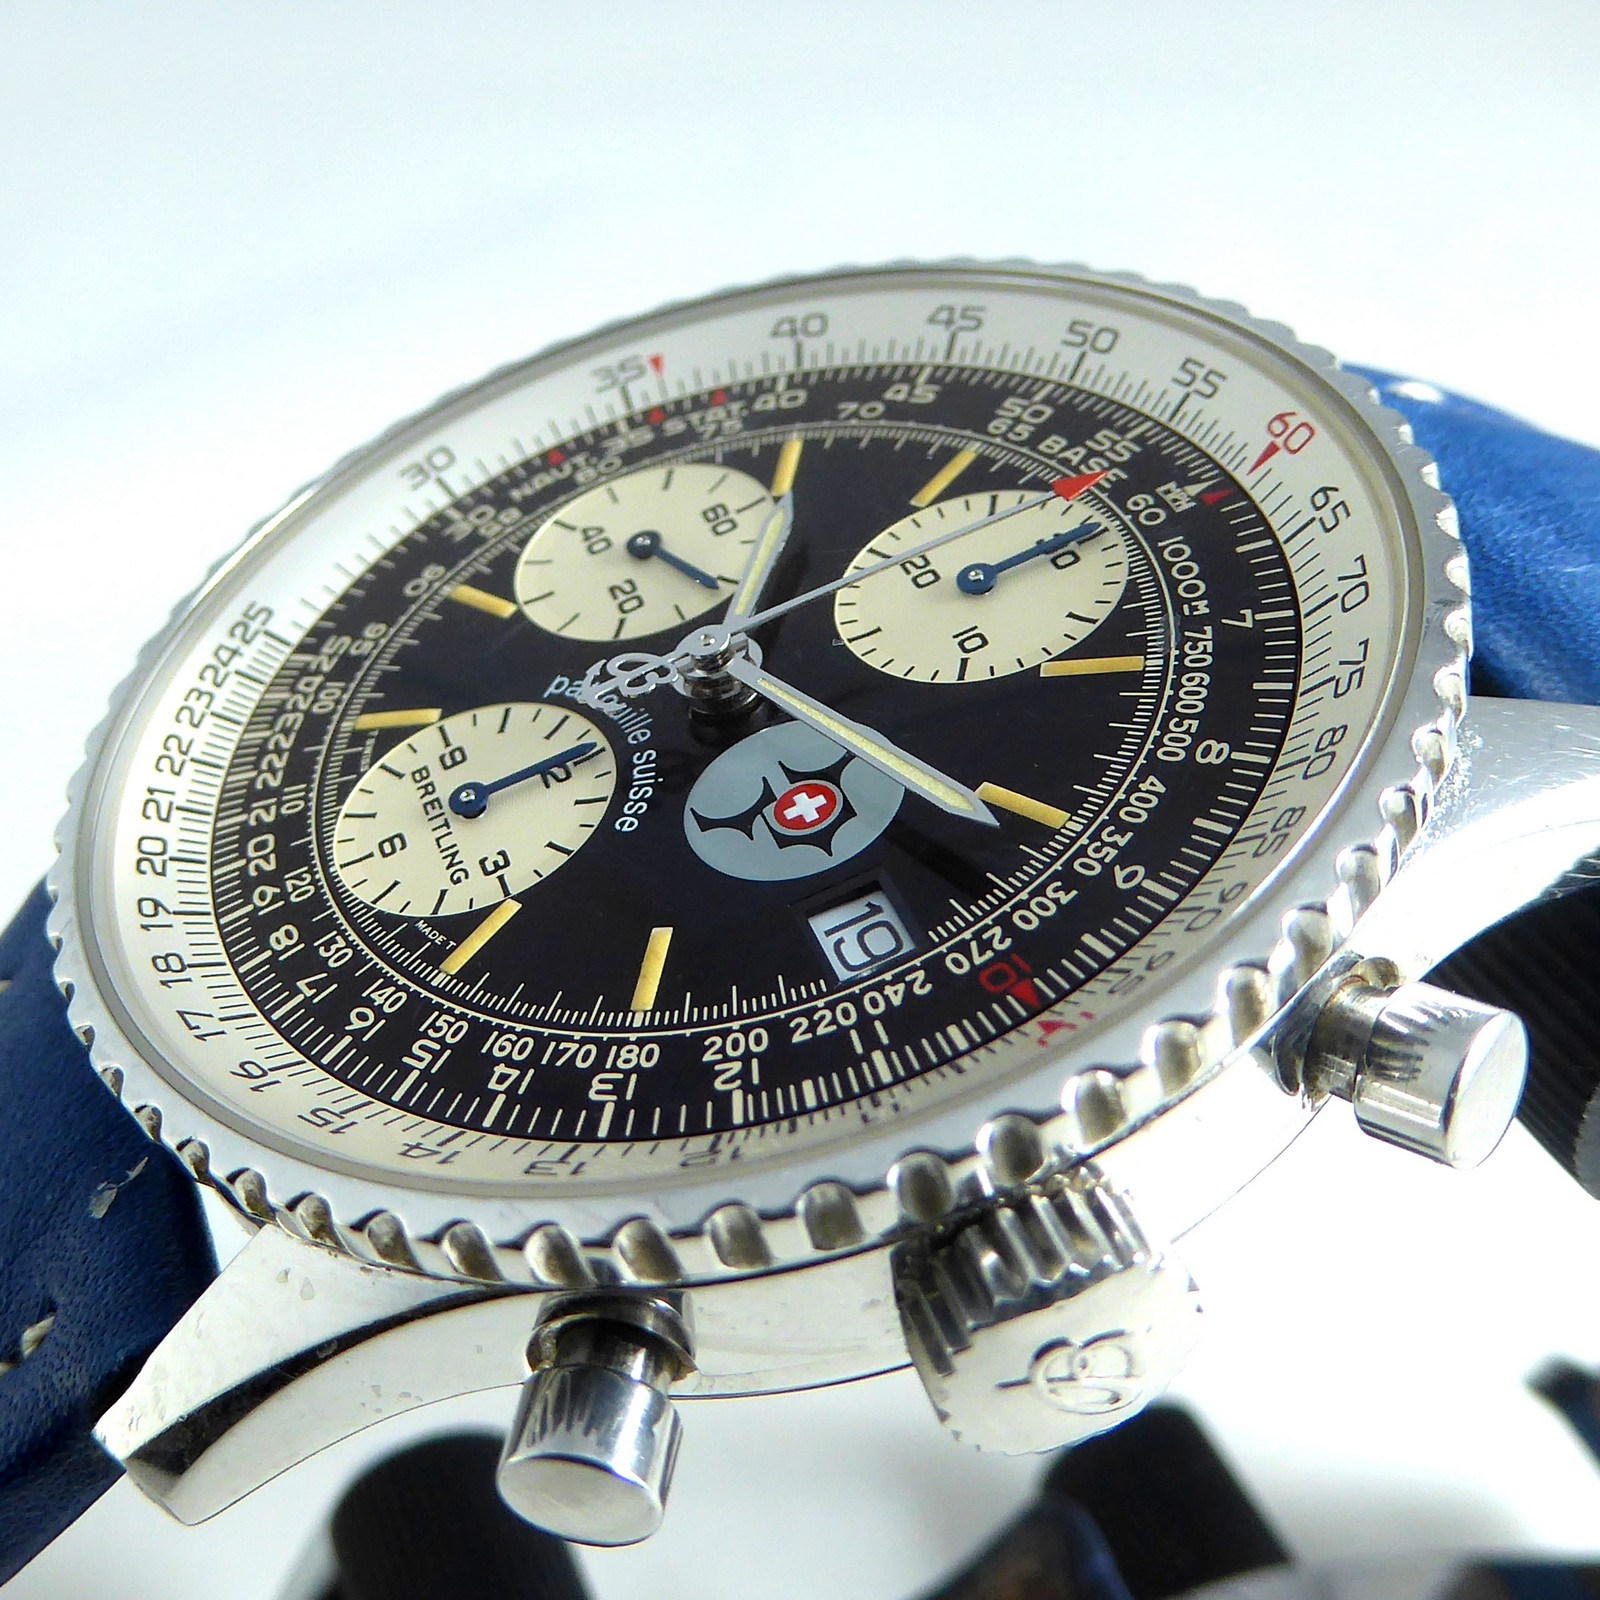 Breitling Navitimer Patrouille Suisse Chronograph Limited Edition Ref. A13022